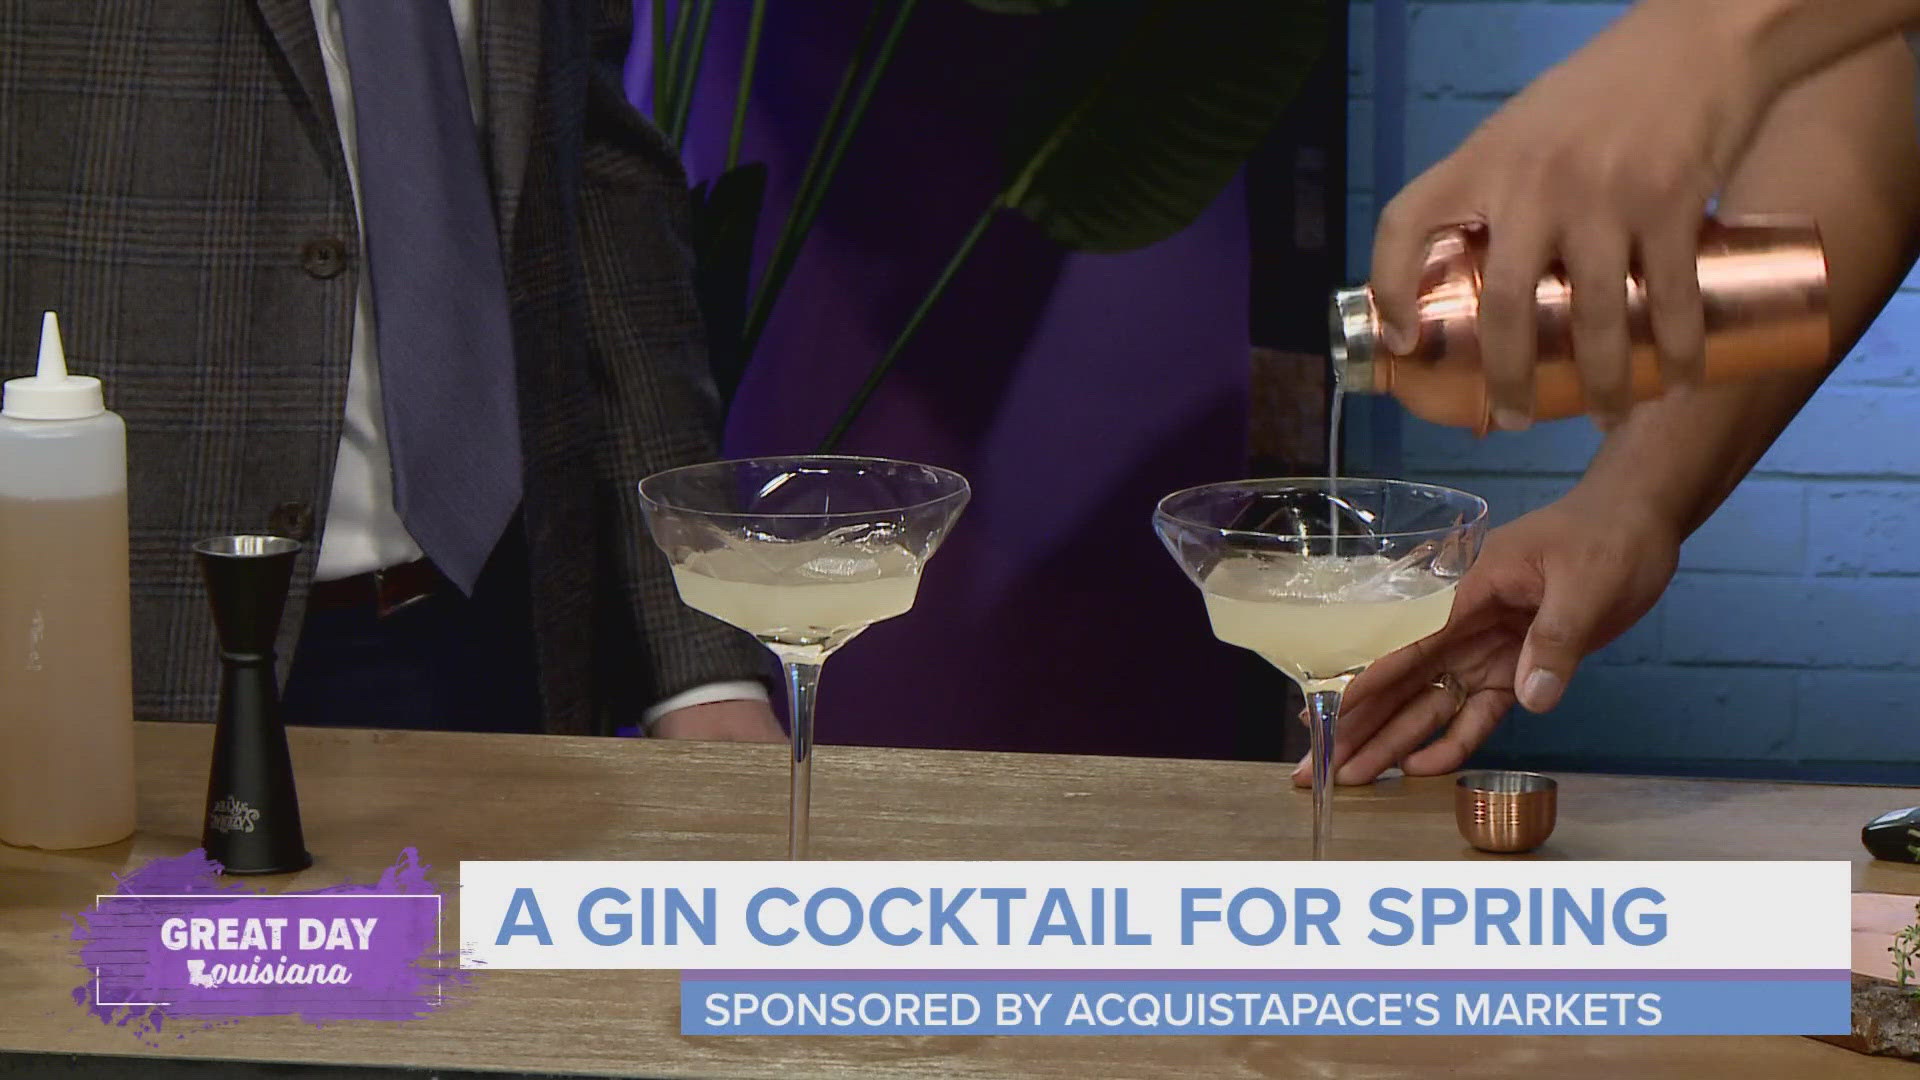 Acquistapace's Markets share the recipe for a fun spring inspired cocktail you can make at home.